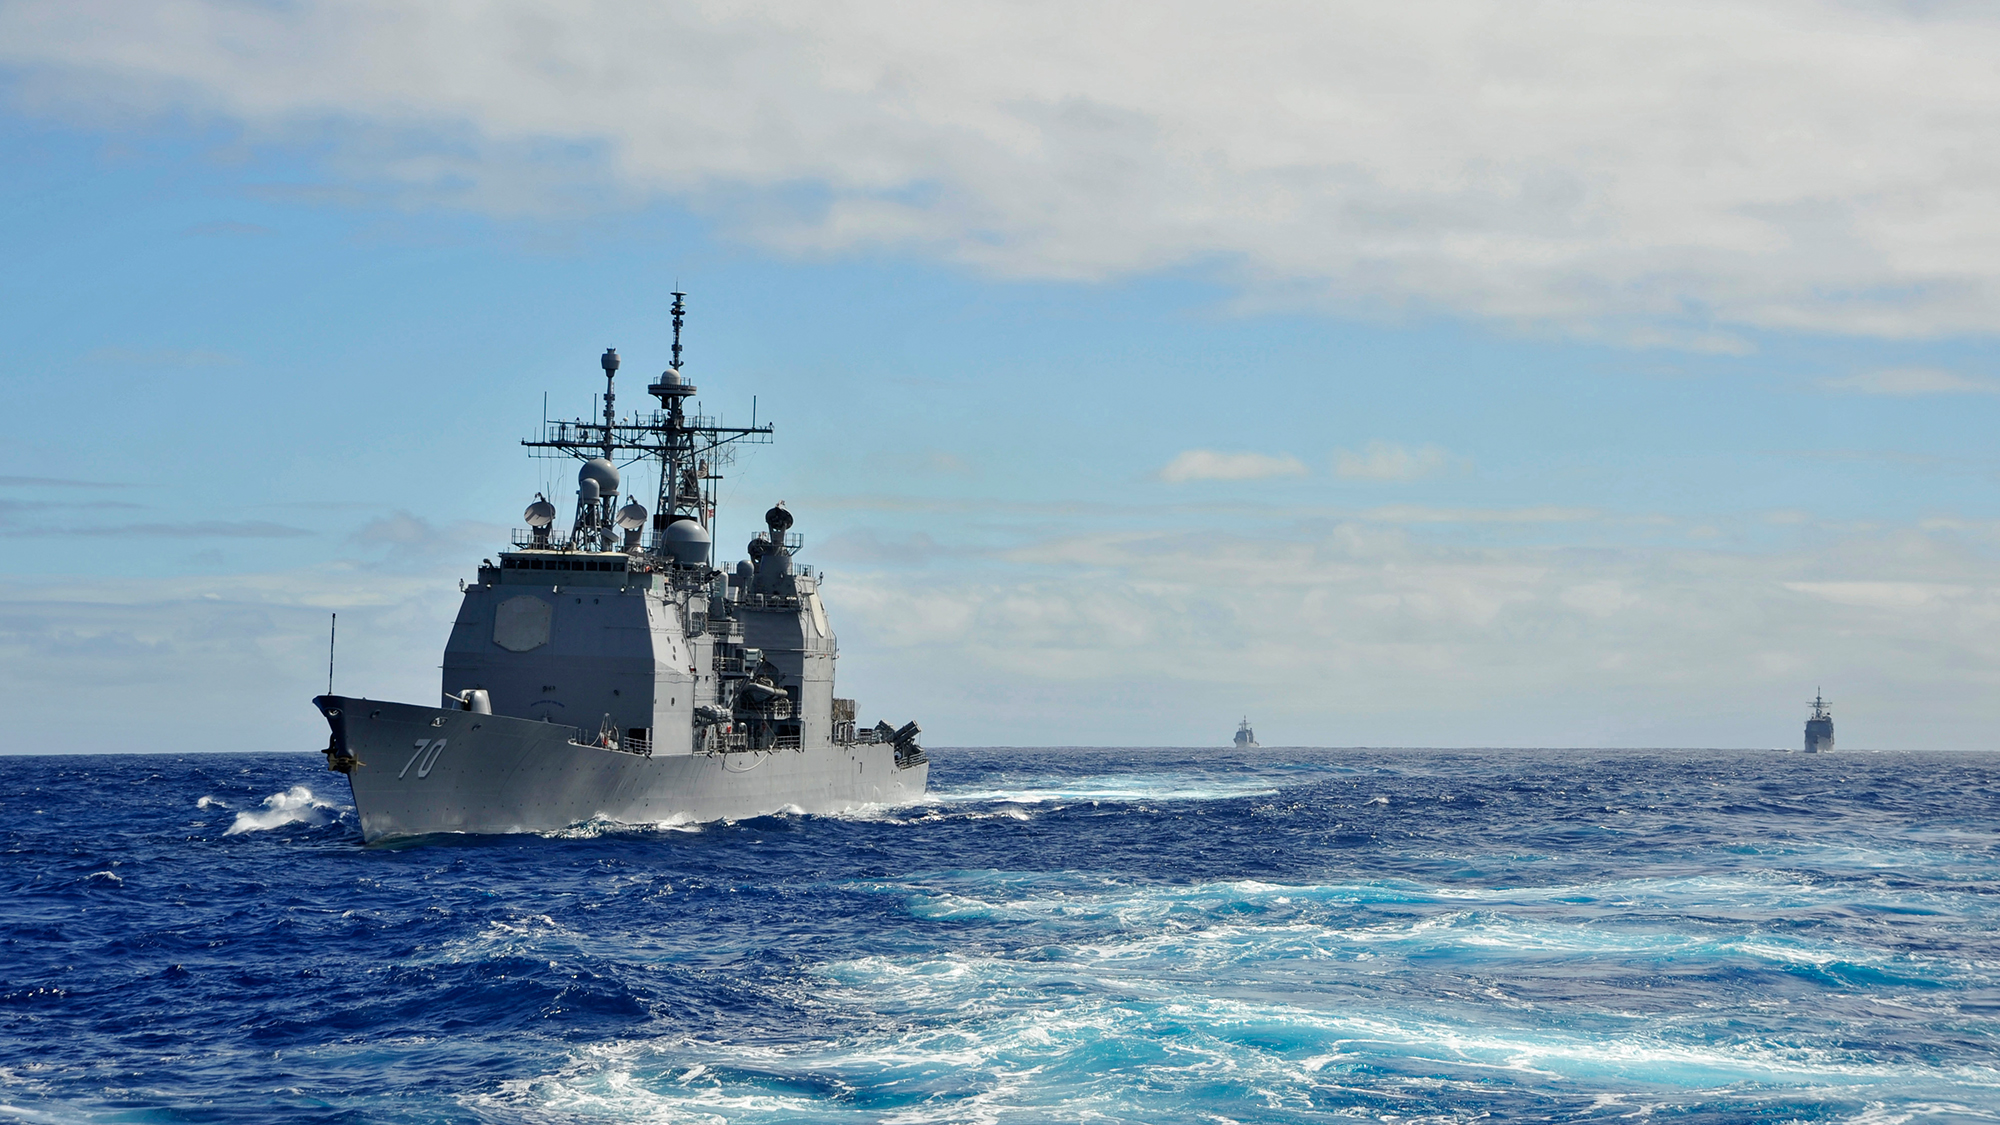 The Navy’s guided-missile cruiser USS Lake Erie is pictured underway in the Pacific Ocean, January 31, 2014. Navy file photo. -